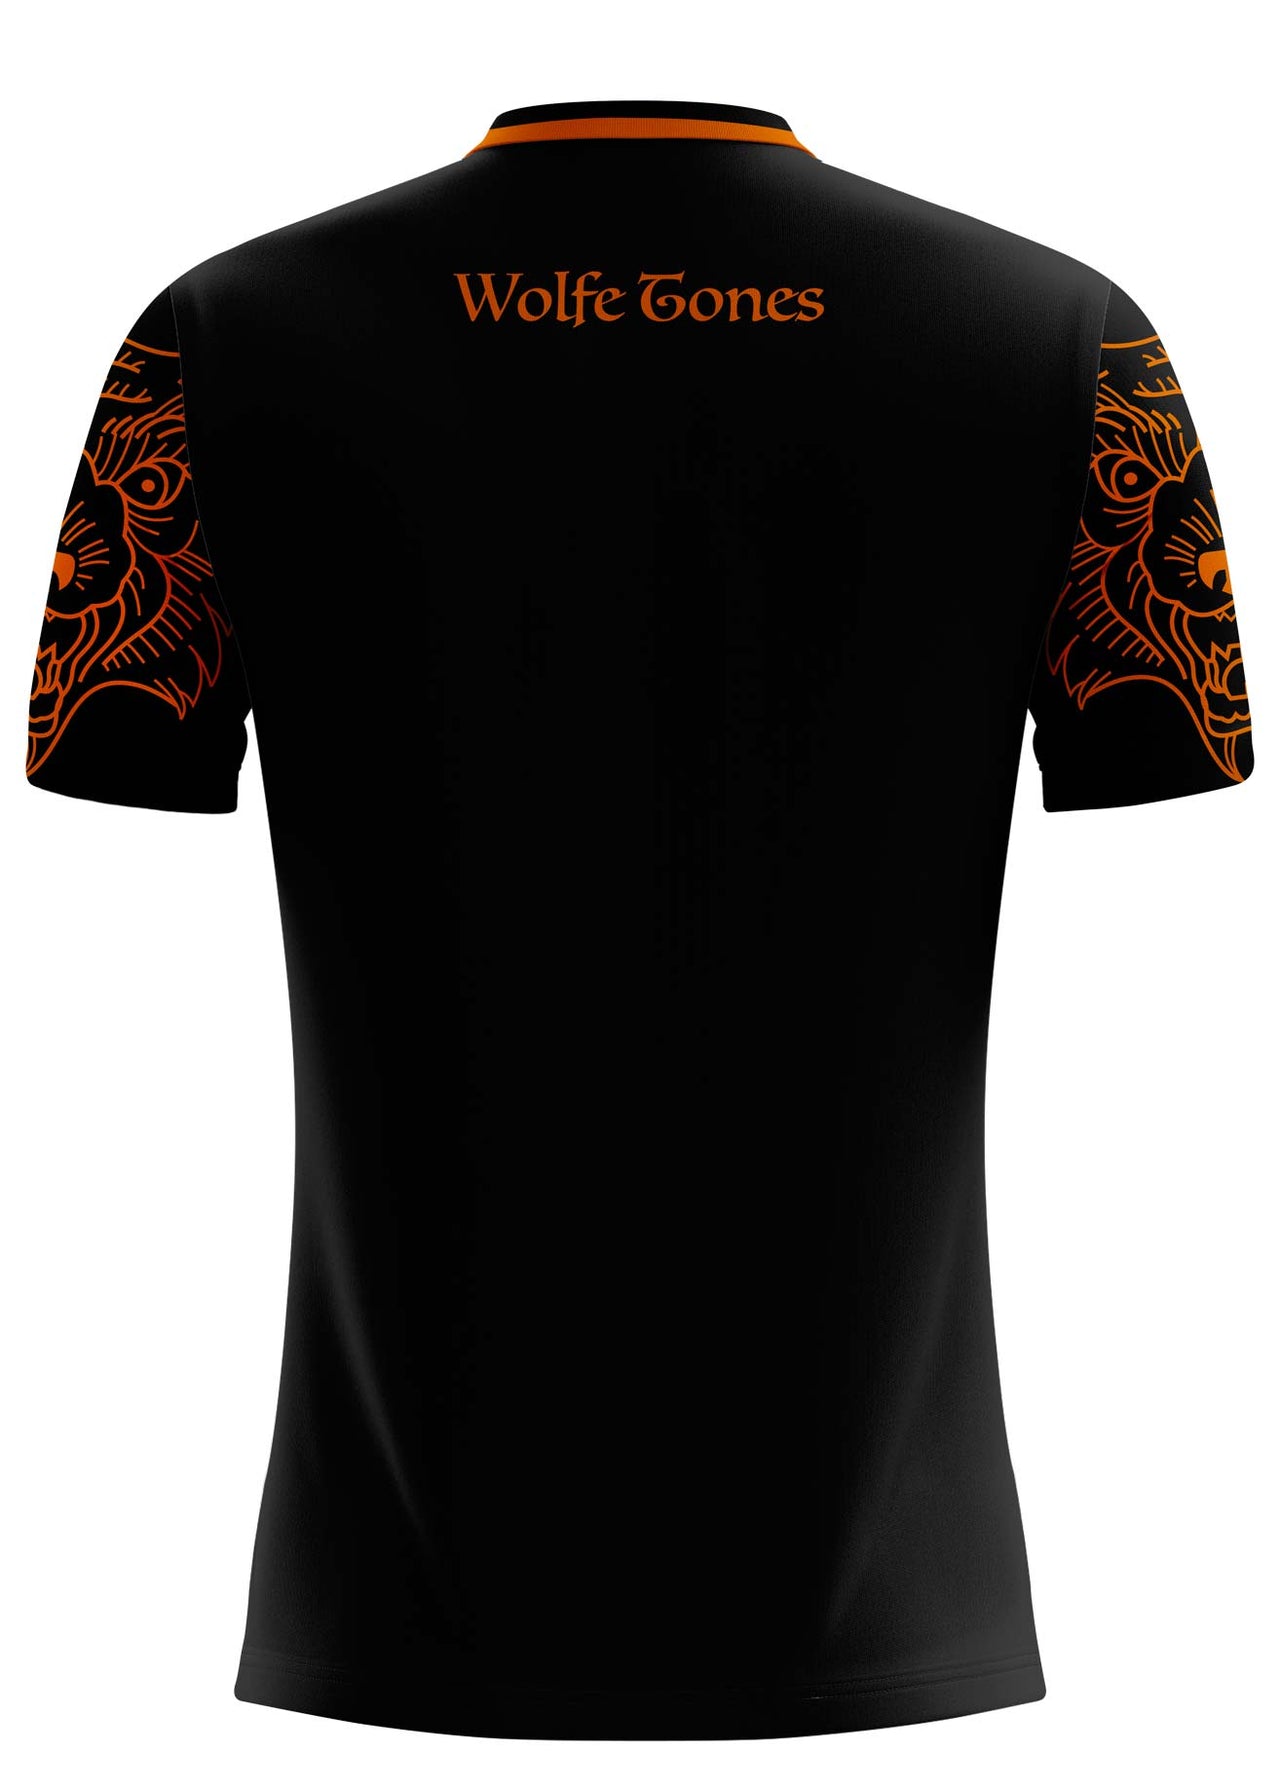 Montana Wolfe Tones Away Jersey Player Fit Adult